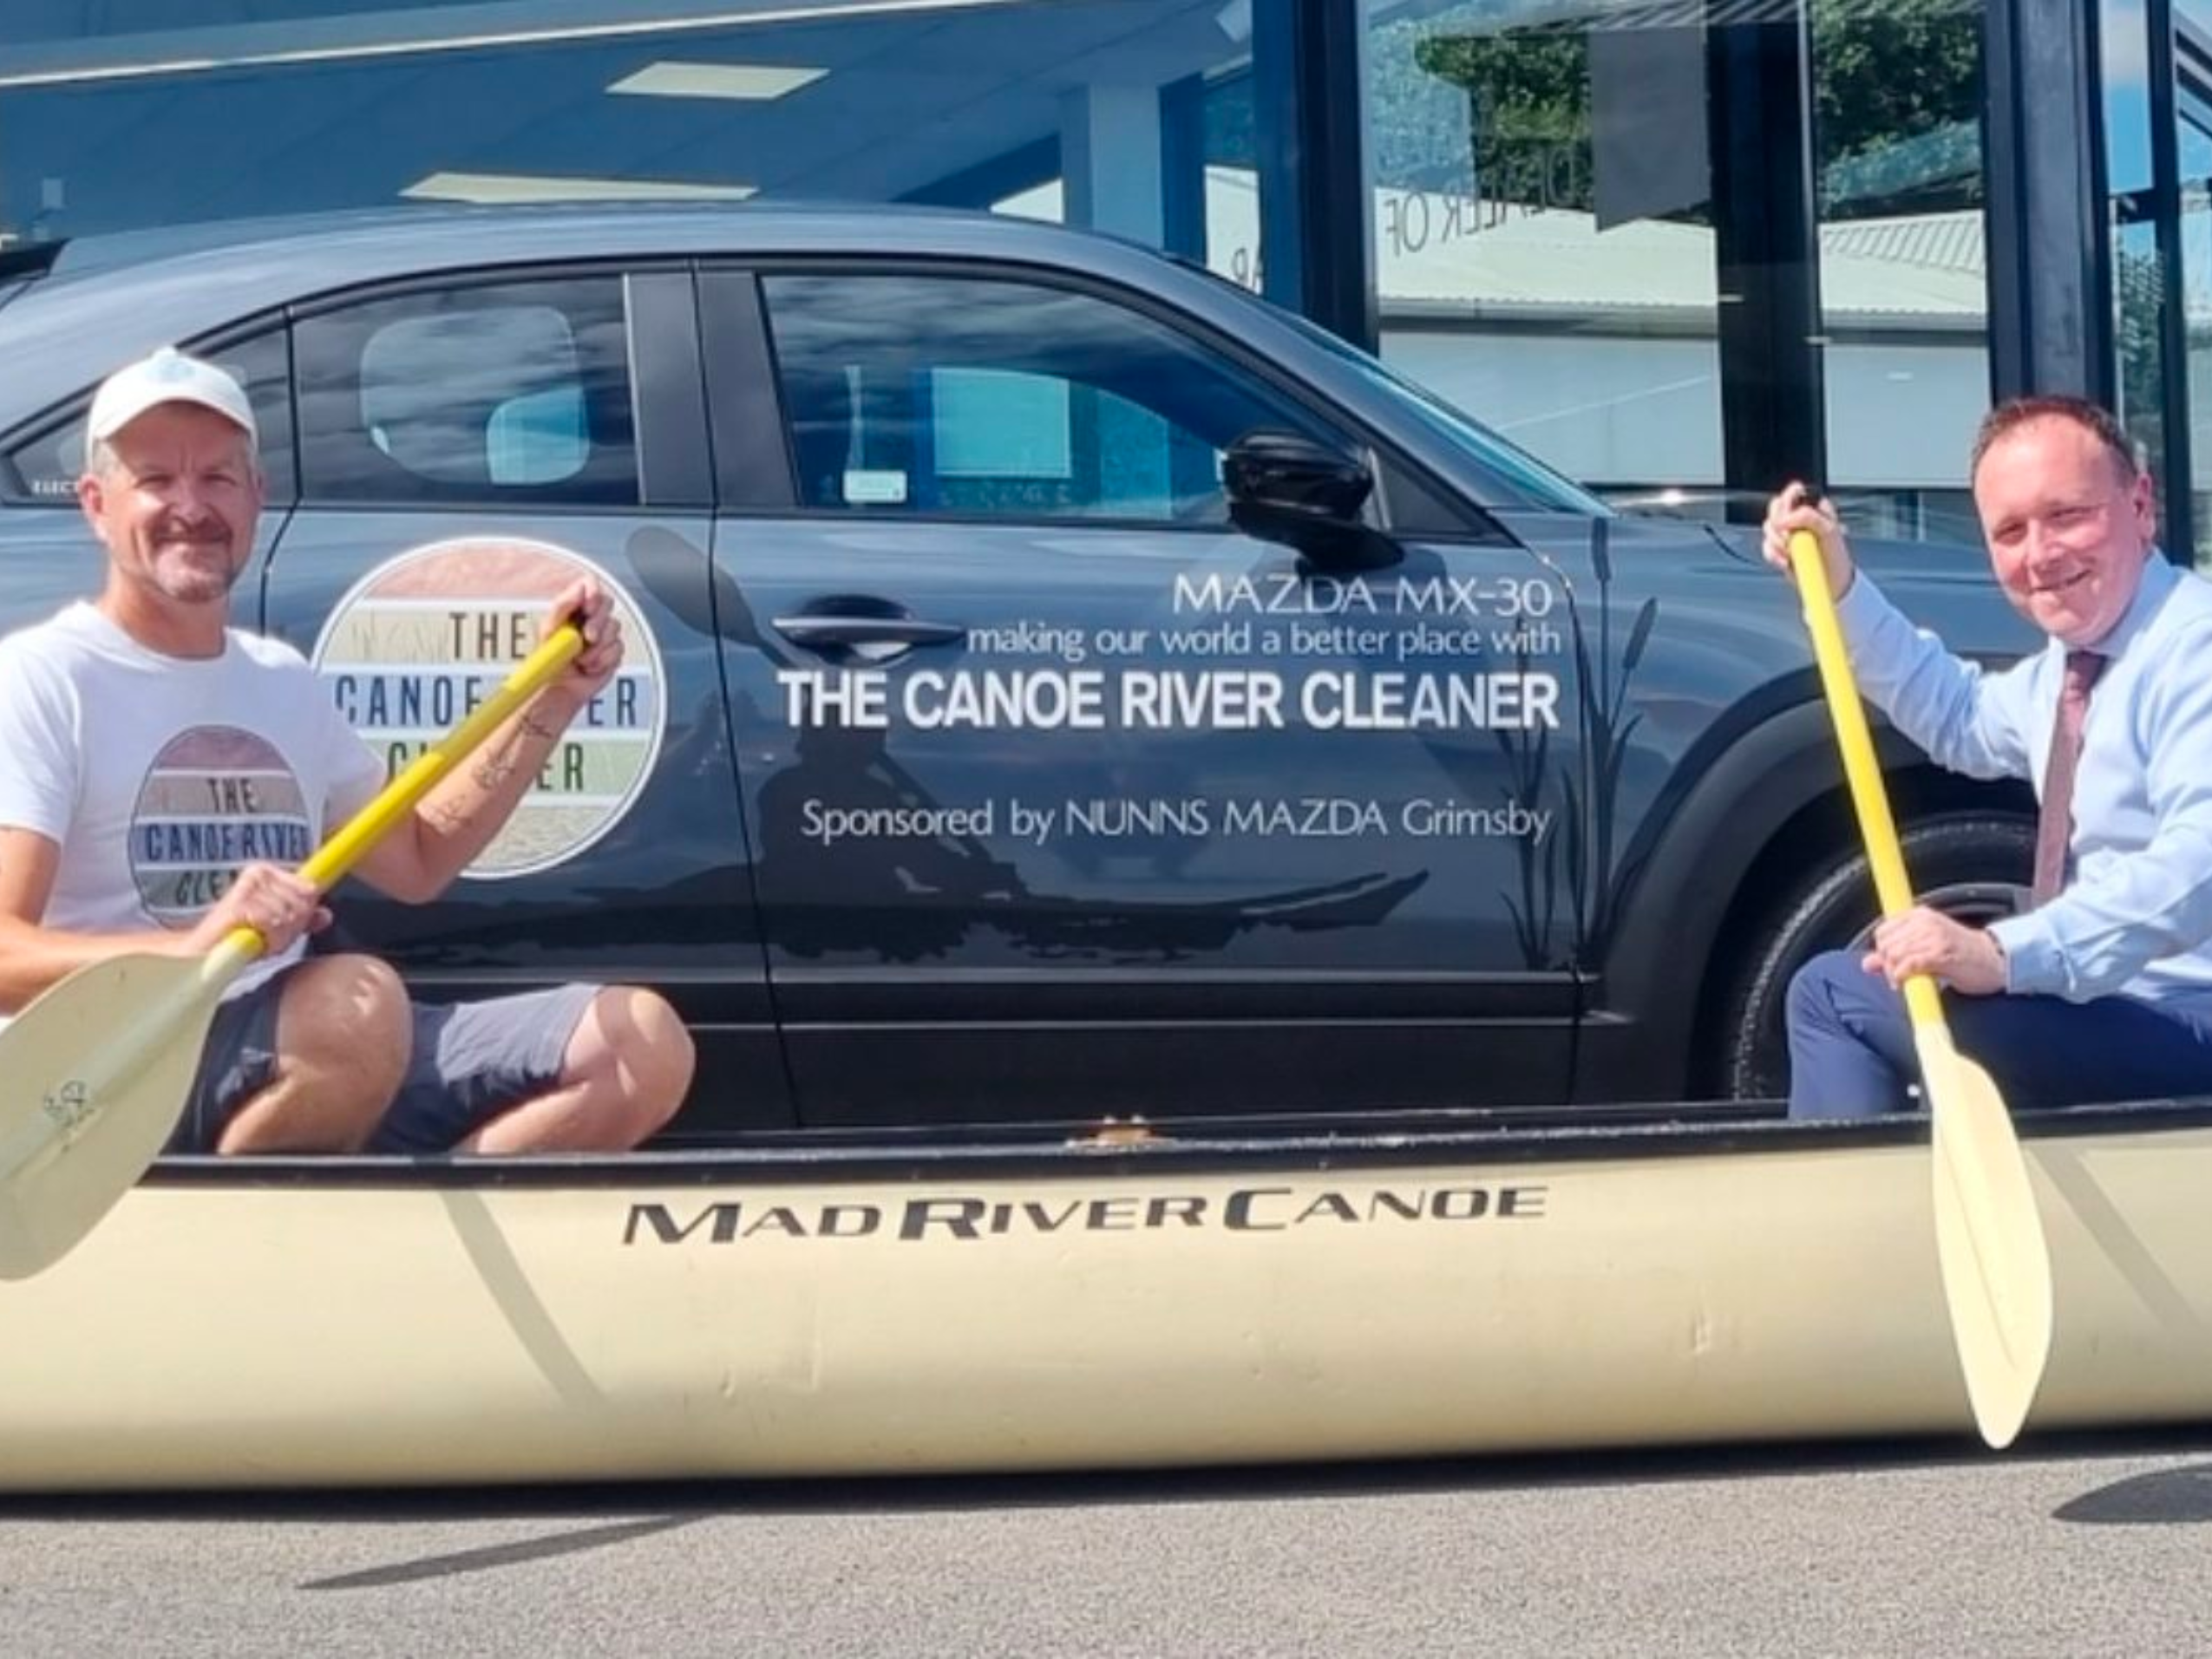 Nunns Mazda Grimsby Helps The Canoe River Cleaner Tidy Up Lincolnshire Rivers While Travelling Emissions-free!